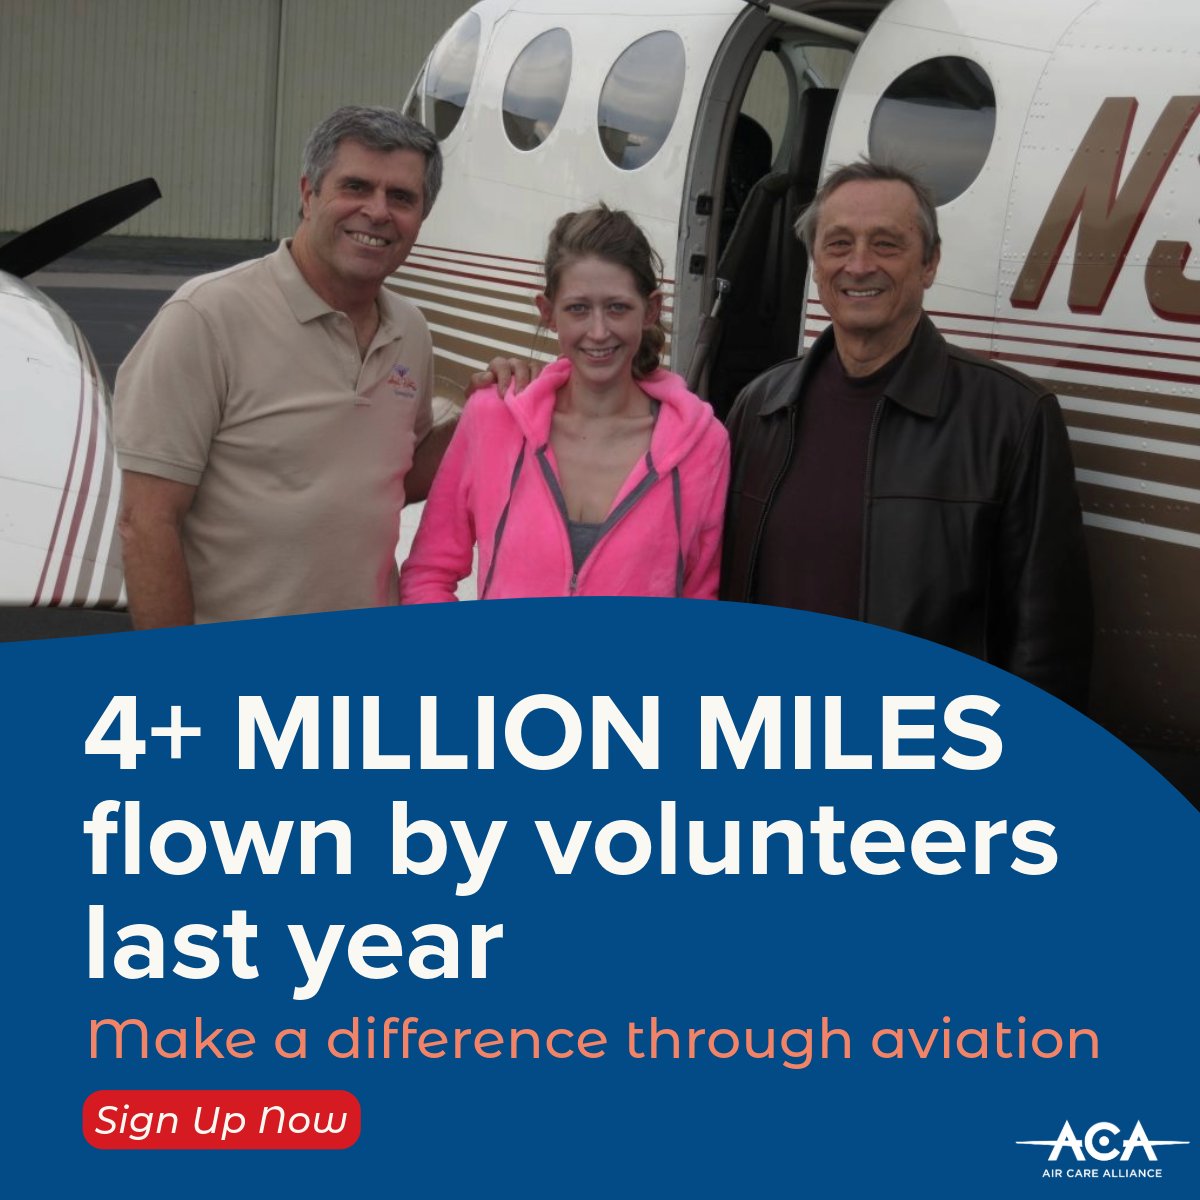 Join us in making a difference through Public Benefit Flying! 🛩️ From medical transportation to disaster relief, your skills can impact lives. Complete a volunteer application today and find opportunities tailored to you: vpoids.aircarealliance.org/join #Volunteer #PublicBenefitFlying